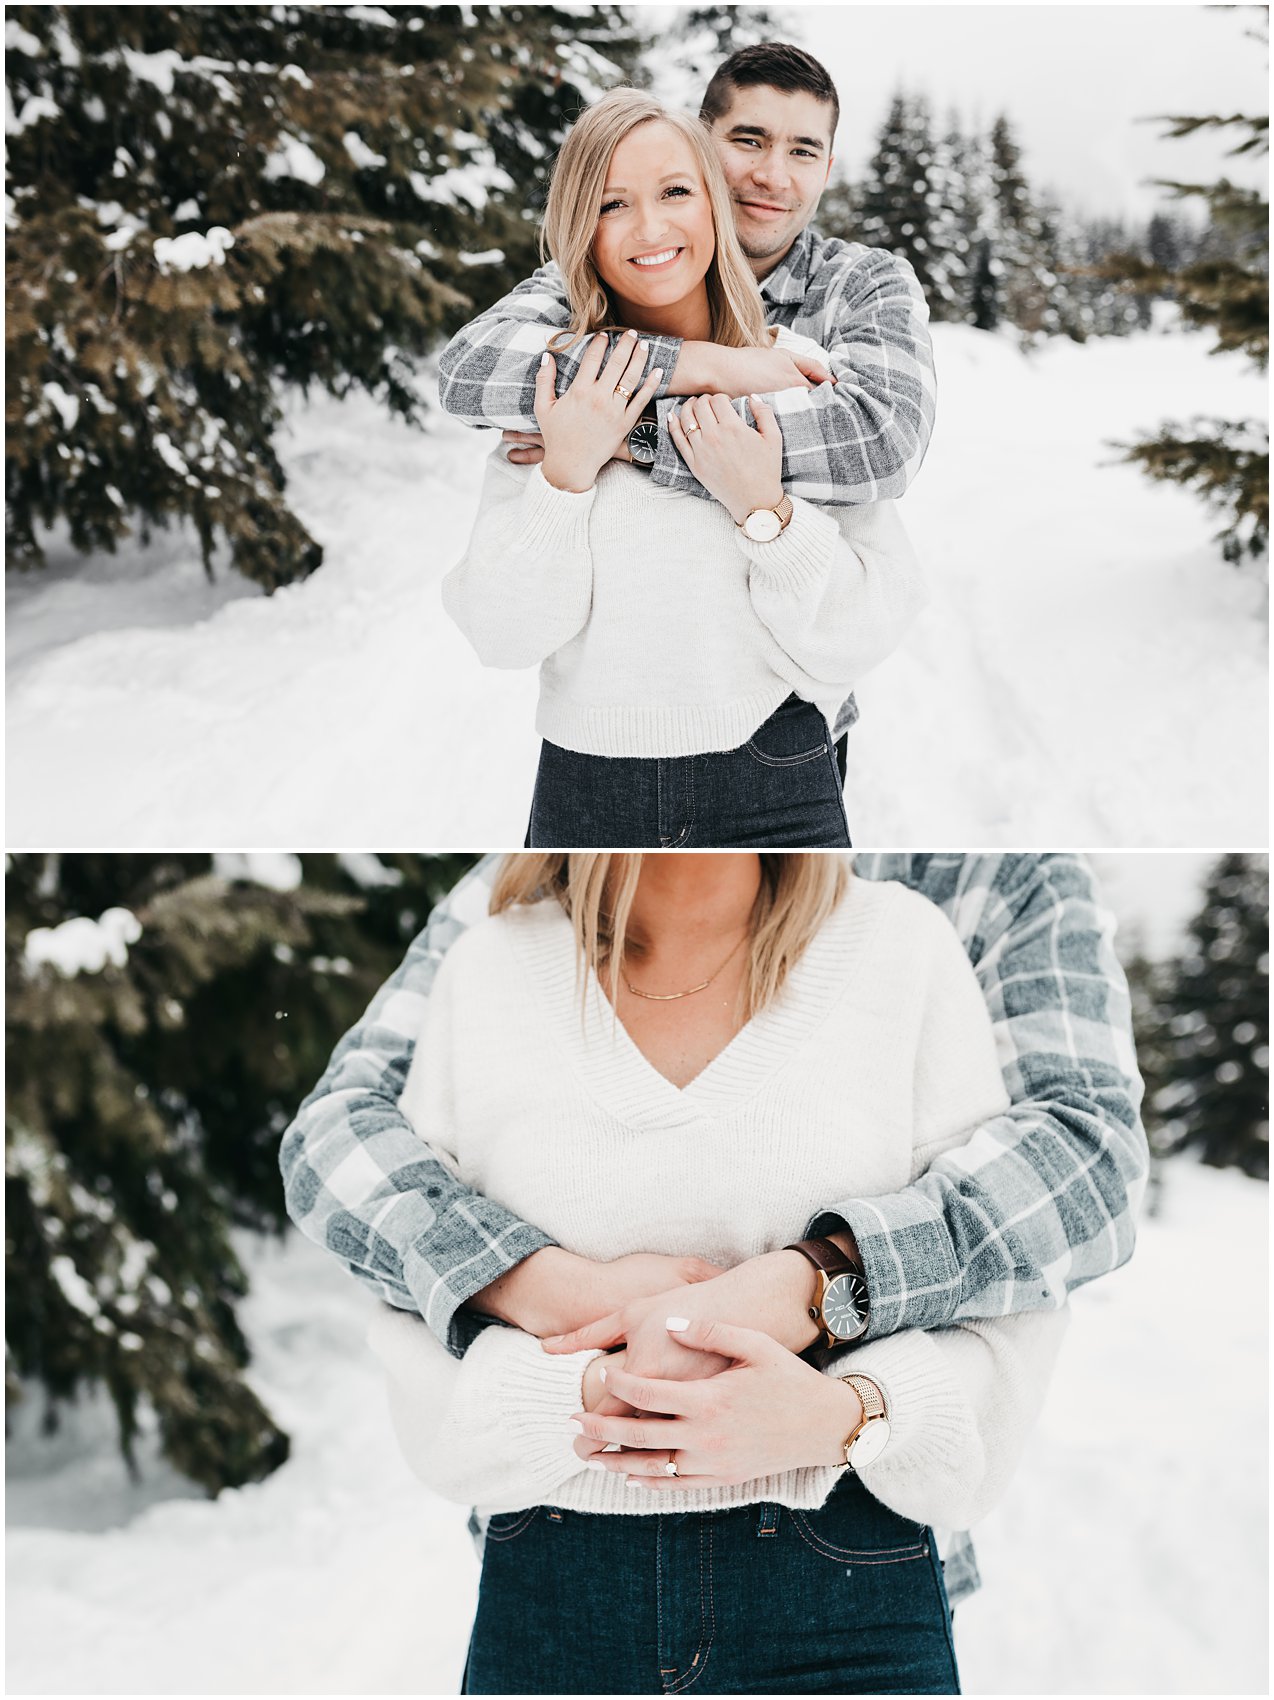 warm hugs in snowy engagement photos